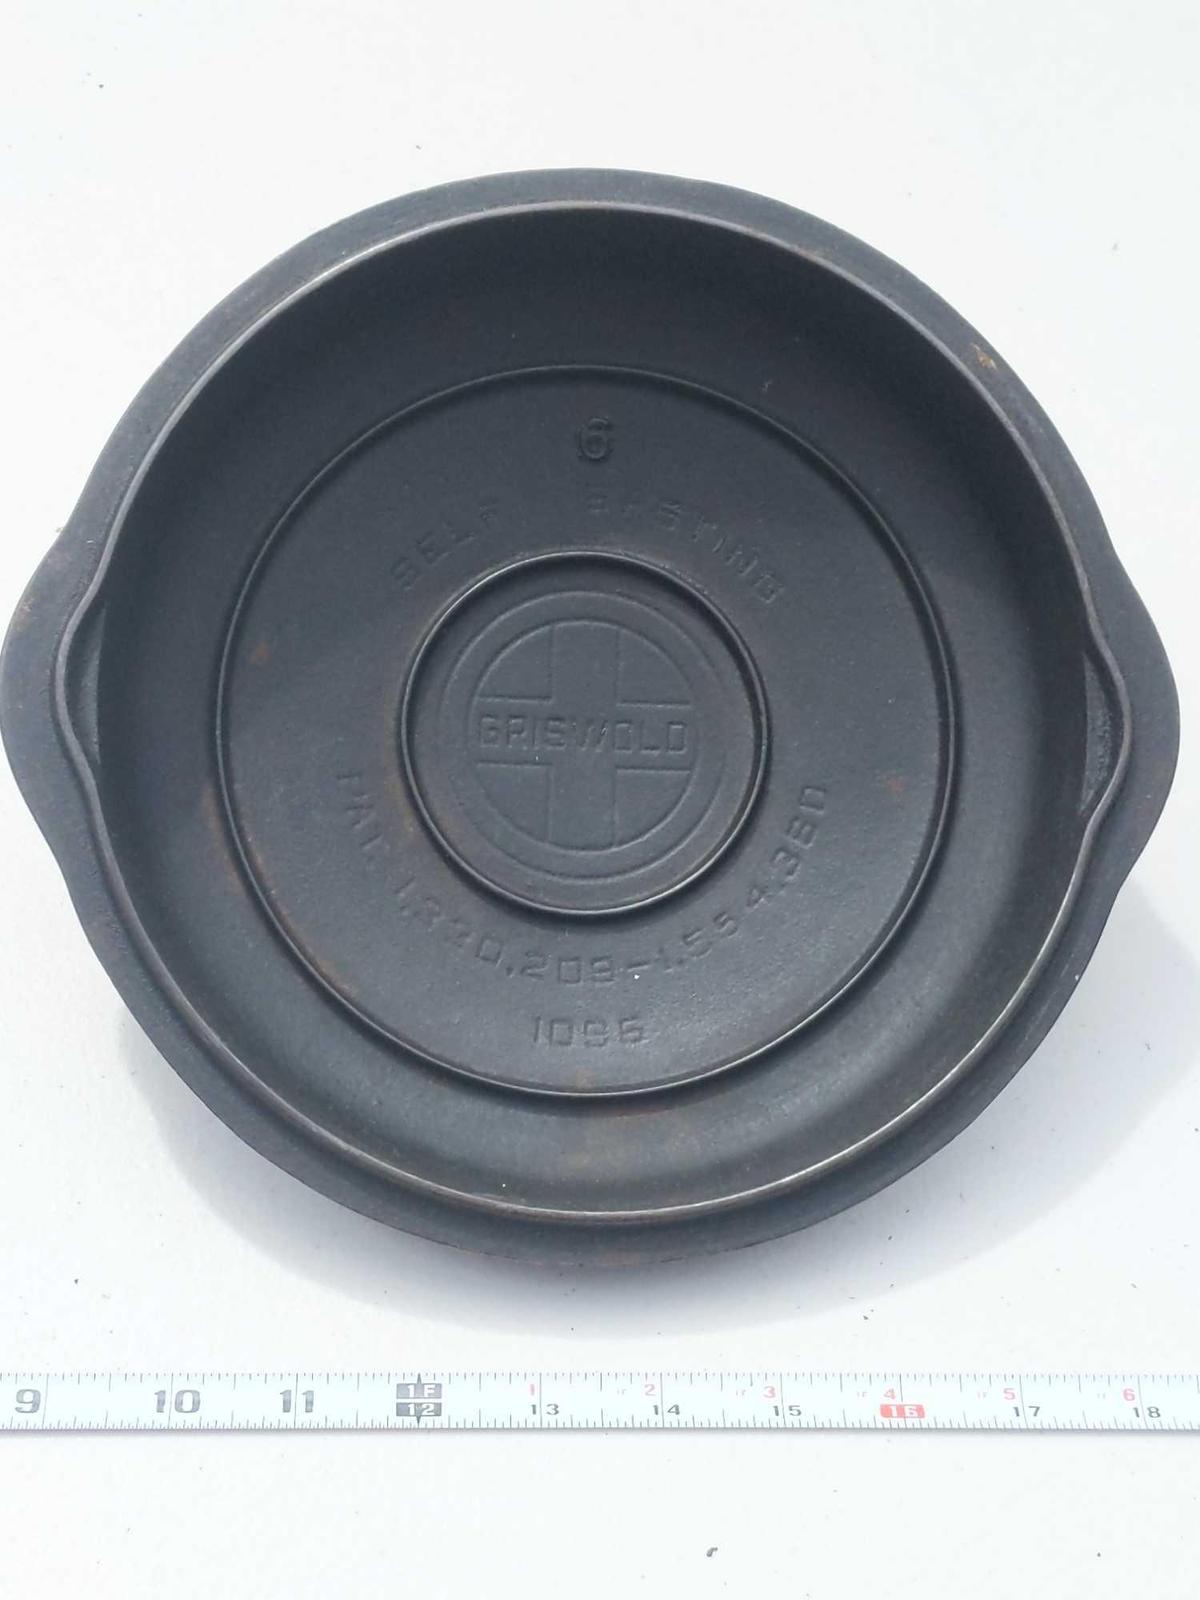 Griswold Self Basting Cast Iron Cover No 6 1096